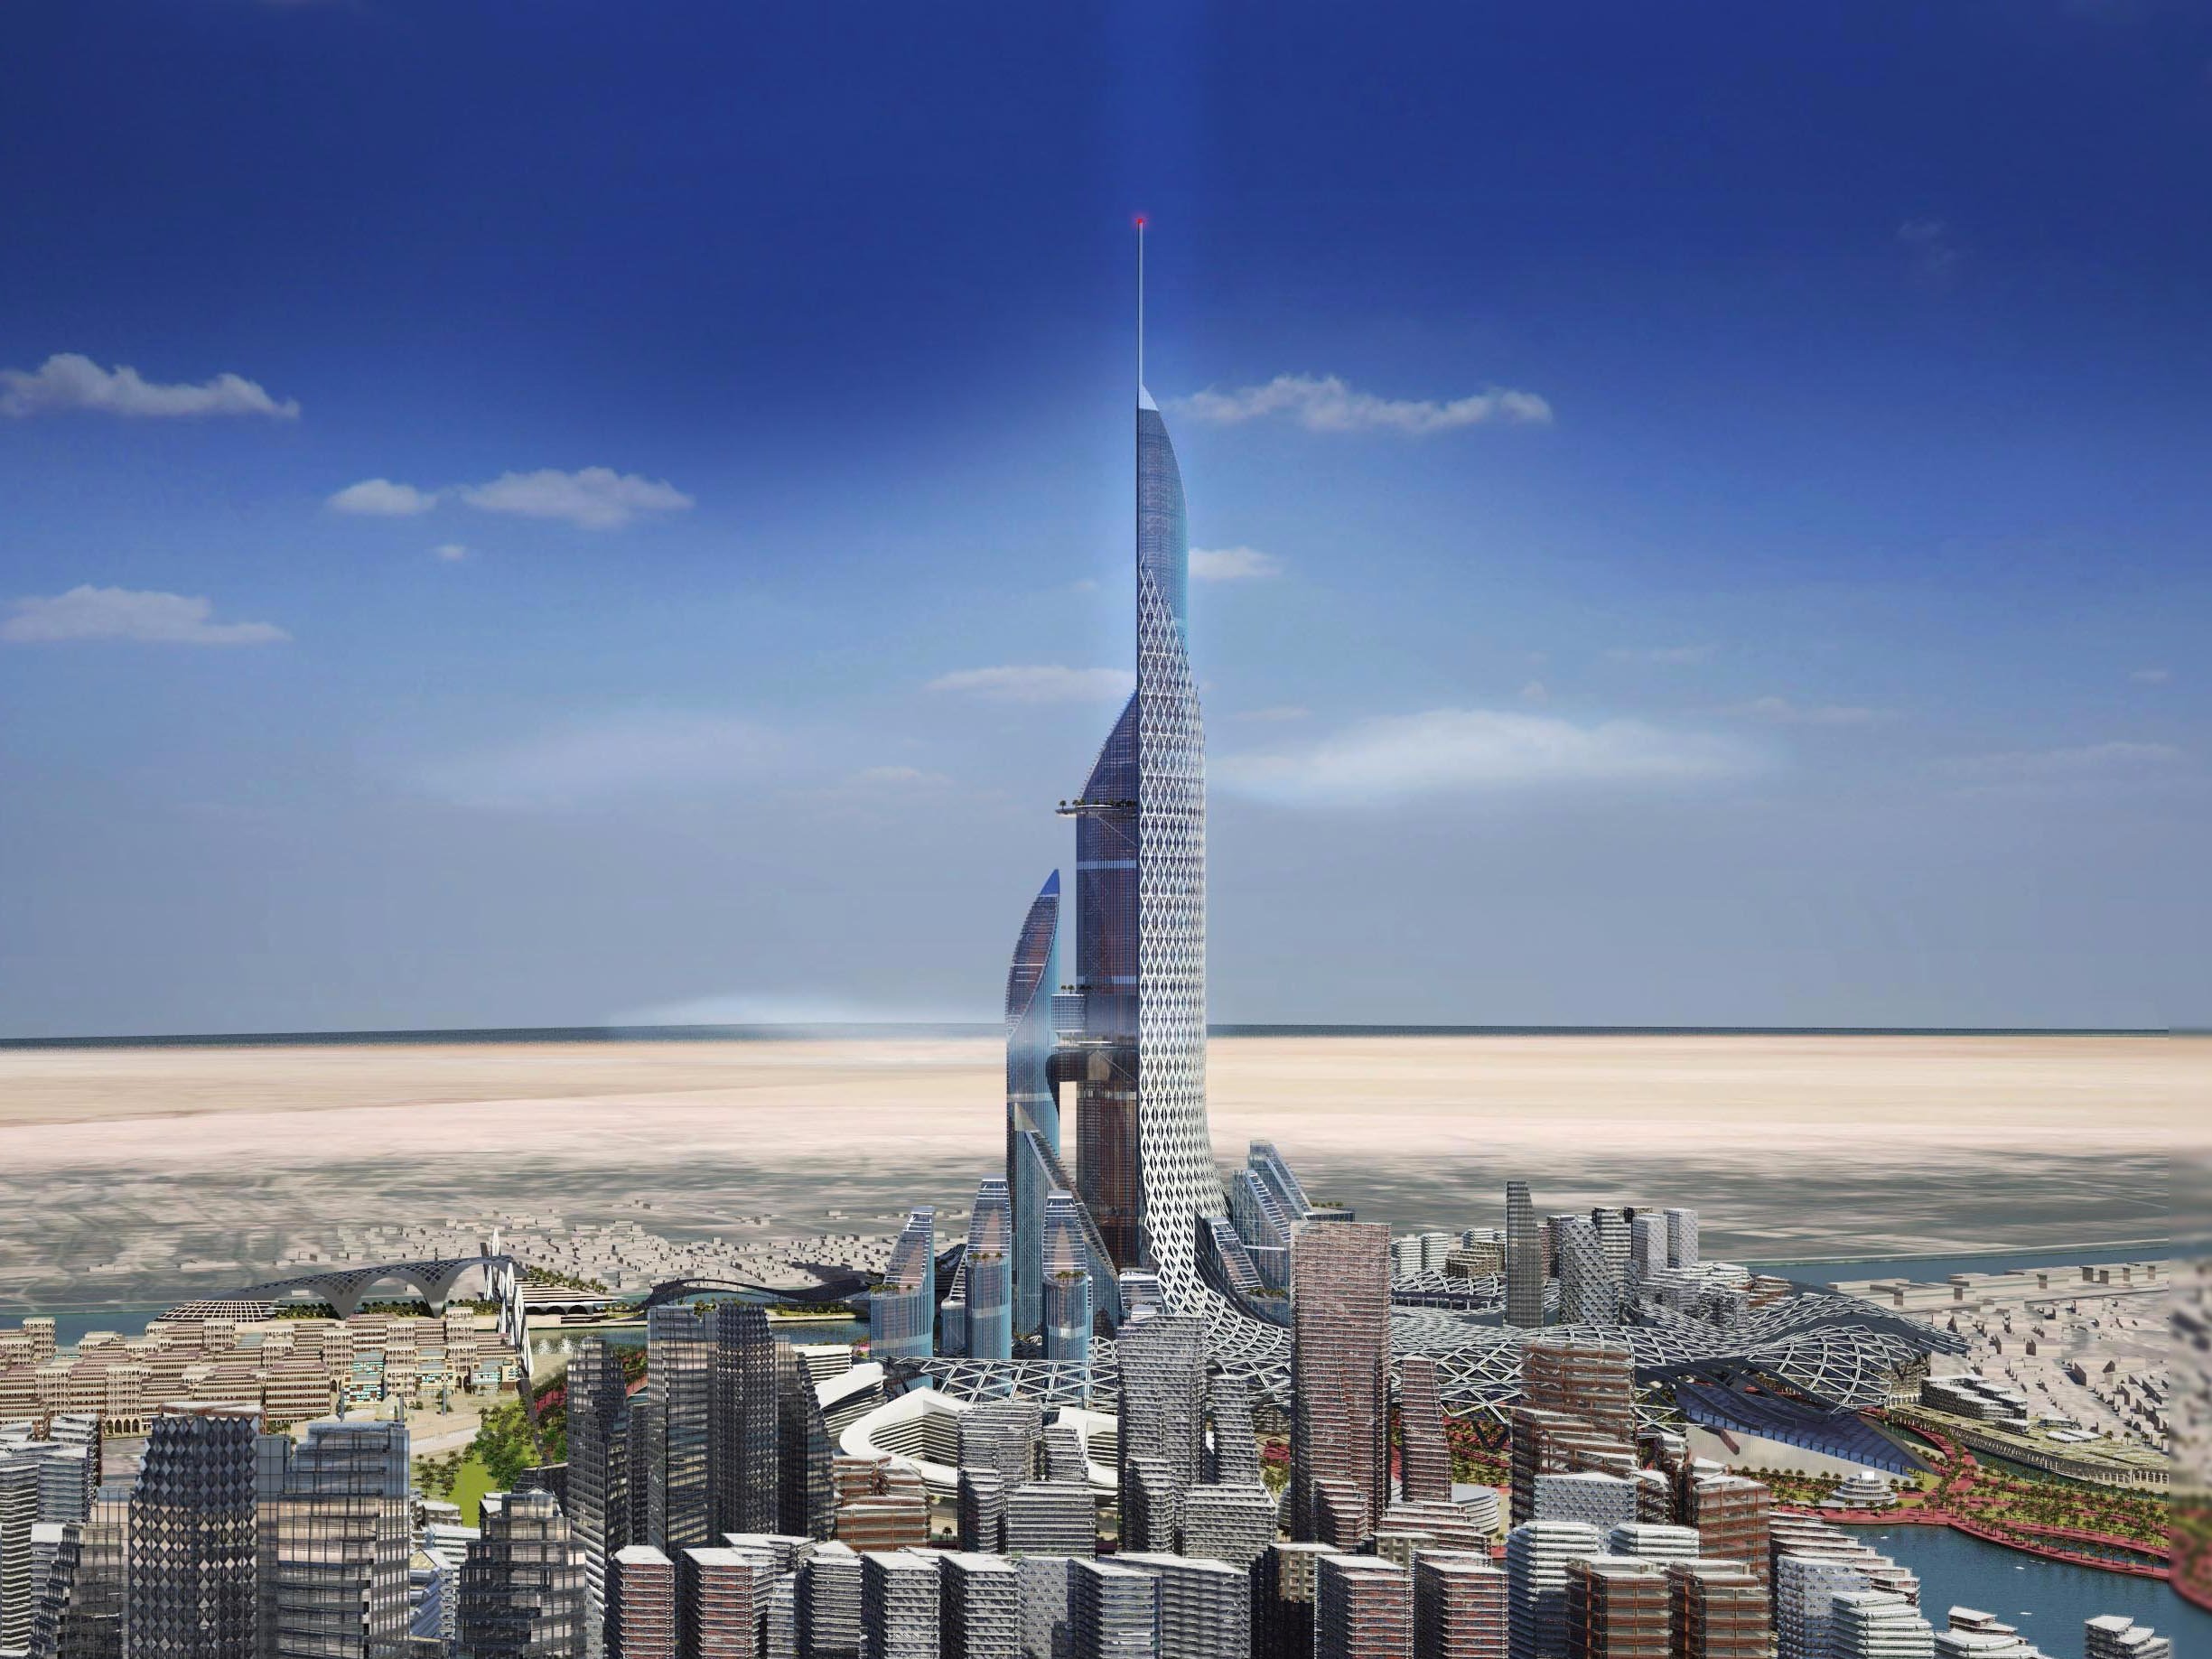 The new tallest building in the world is set to rise in Iraq